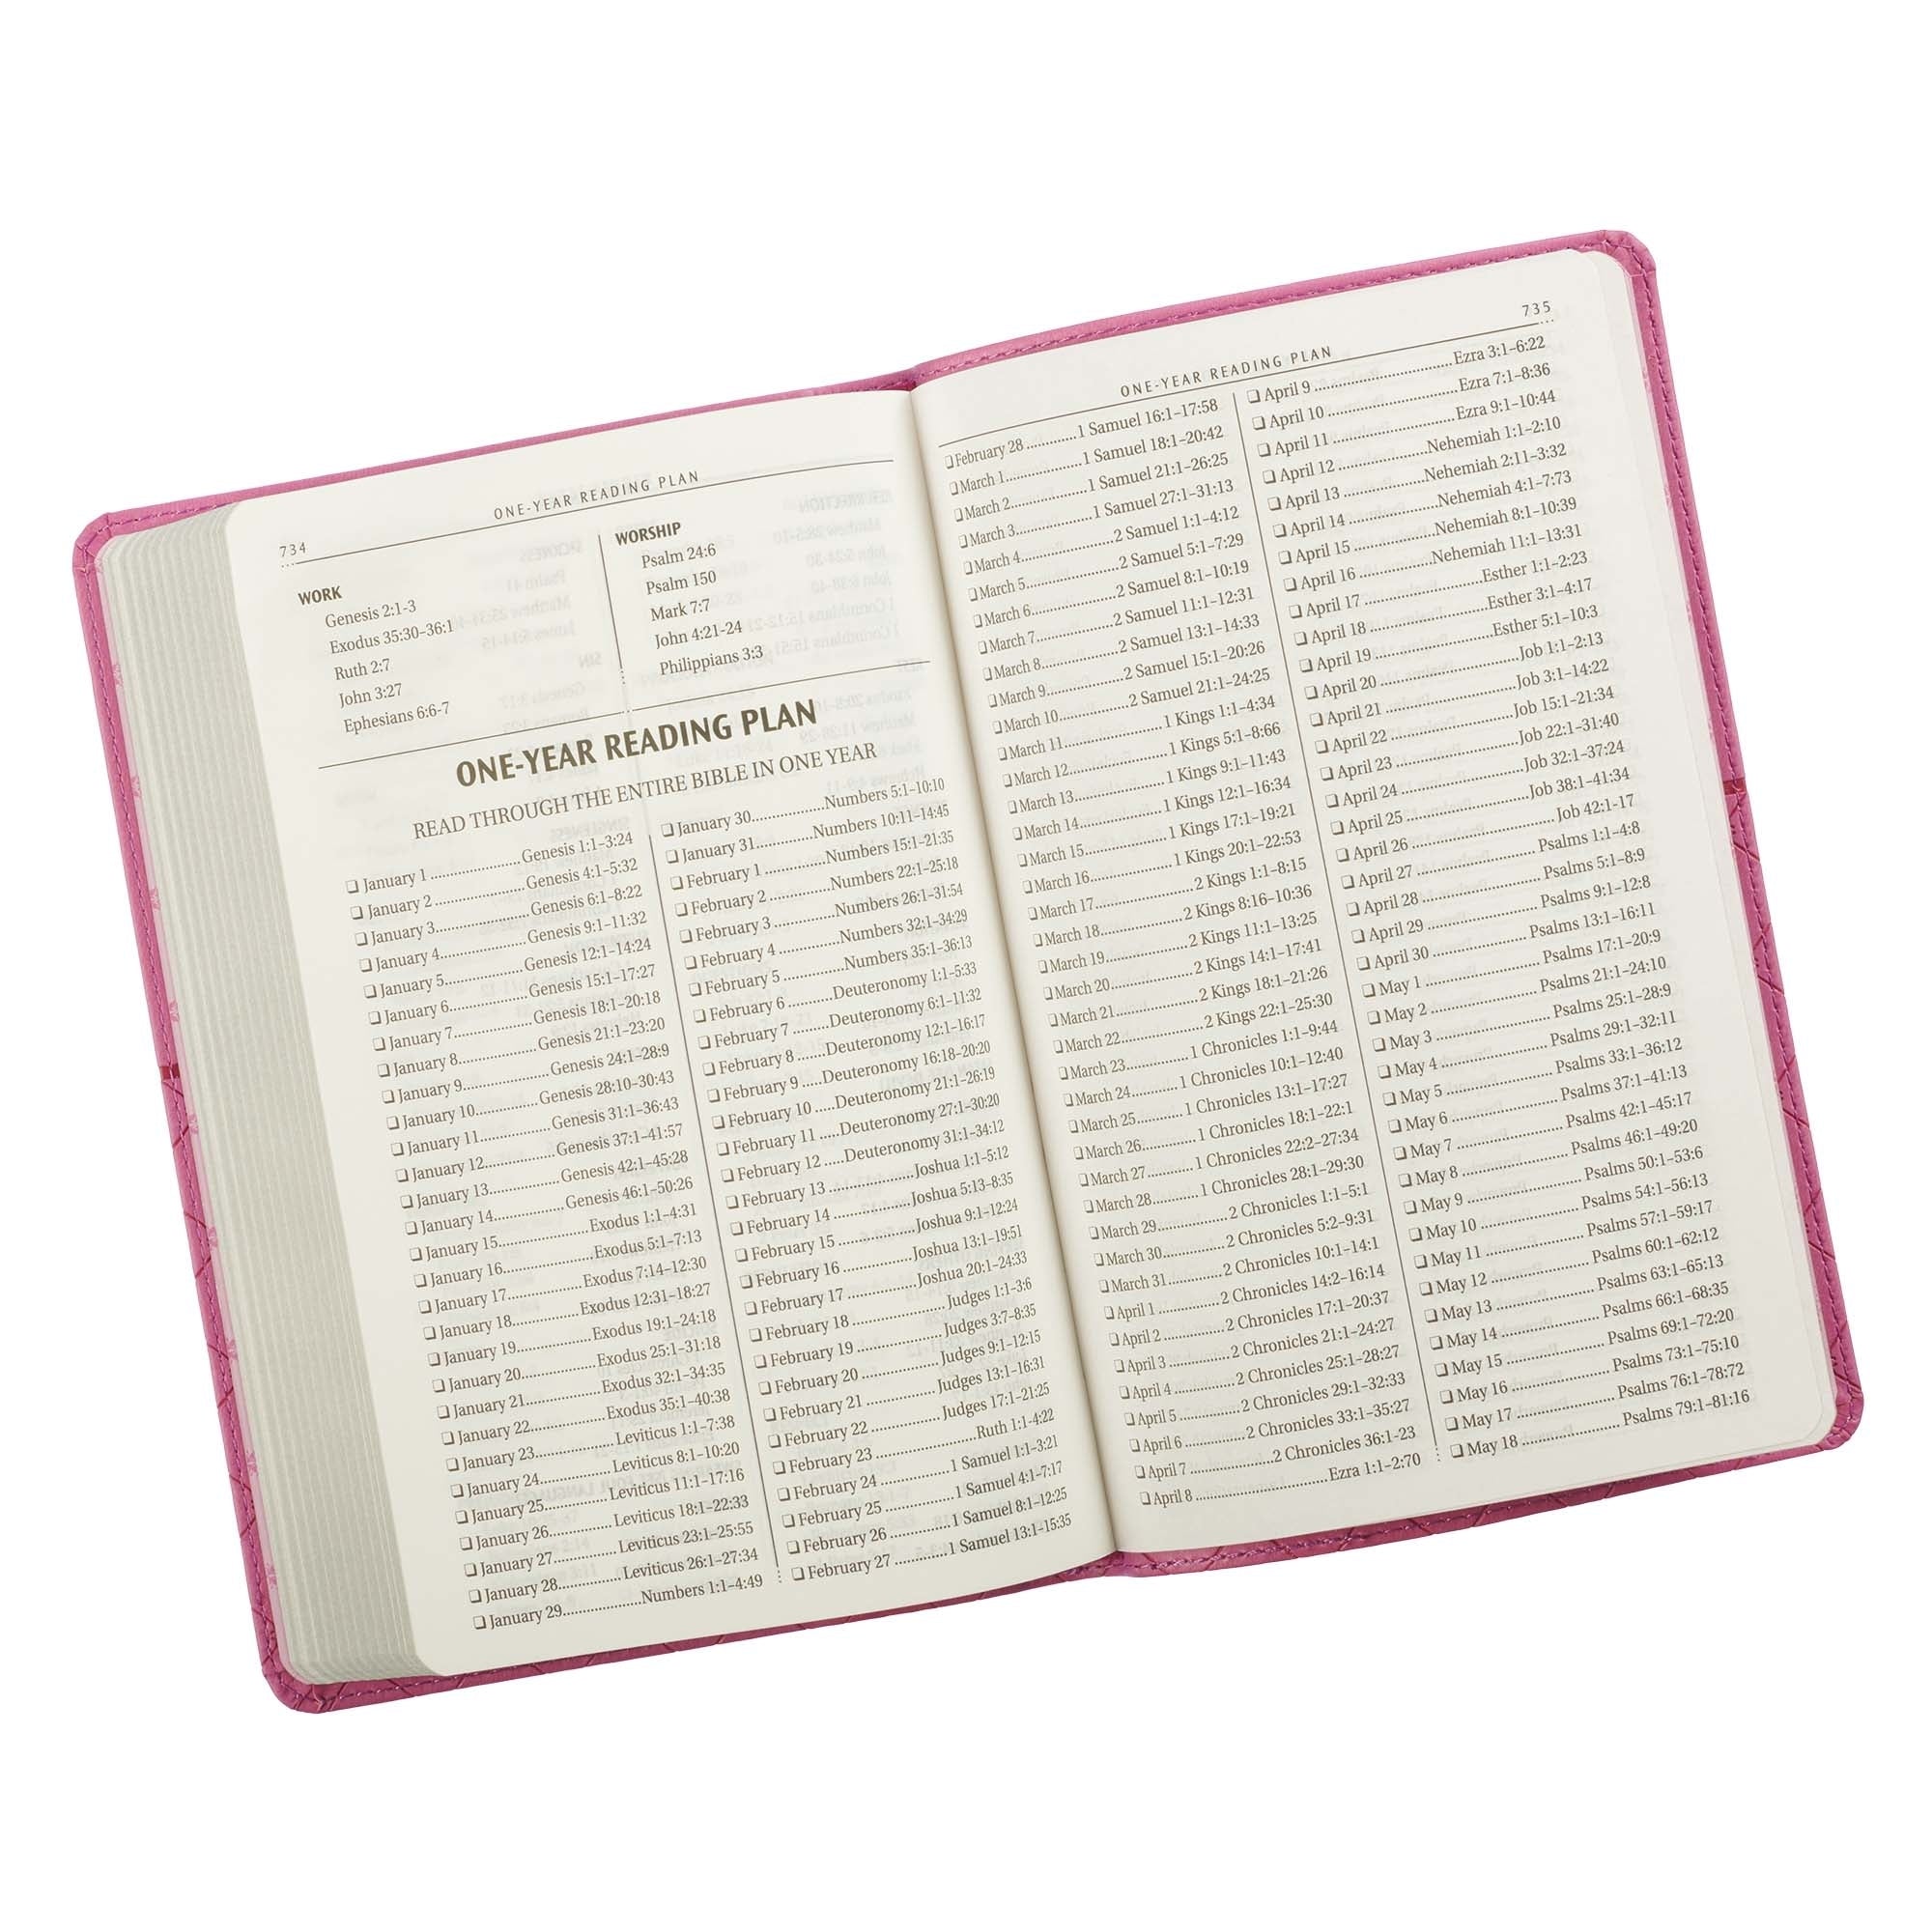 Image of Pink Faux Leather King James Version Gift Edition Bible other